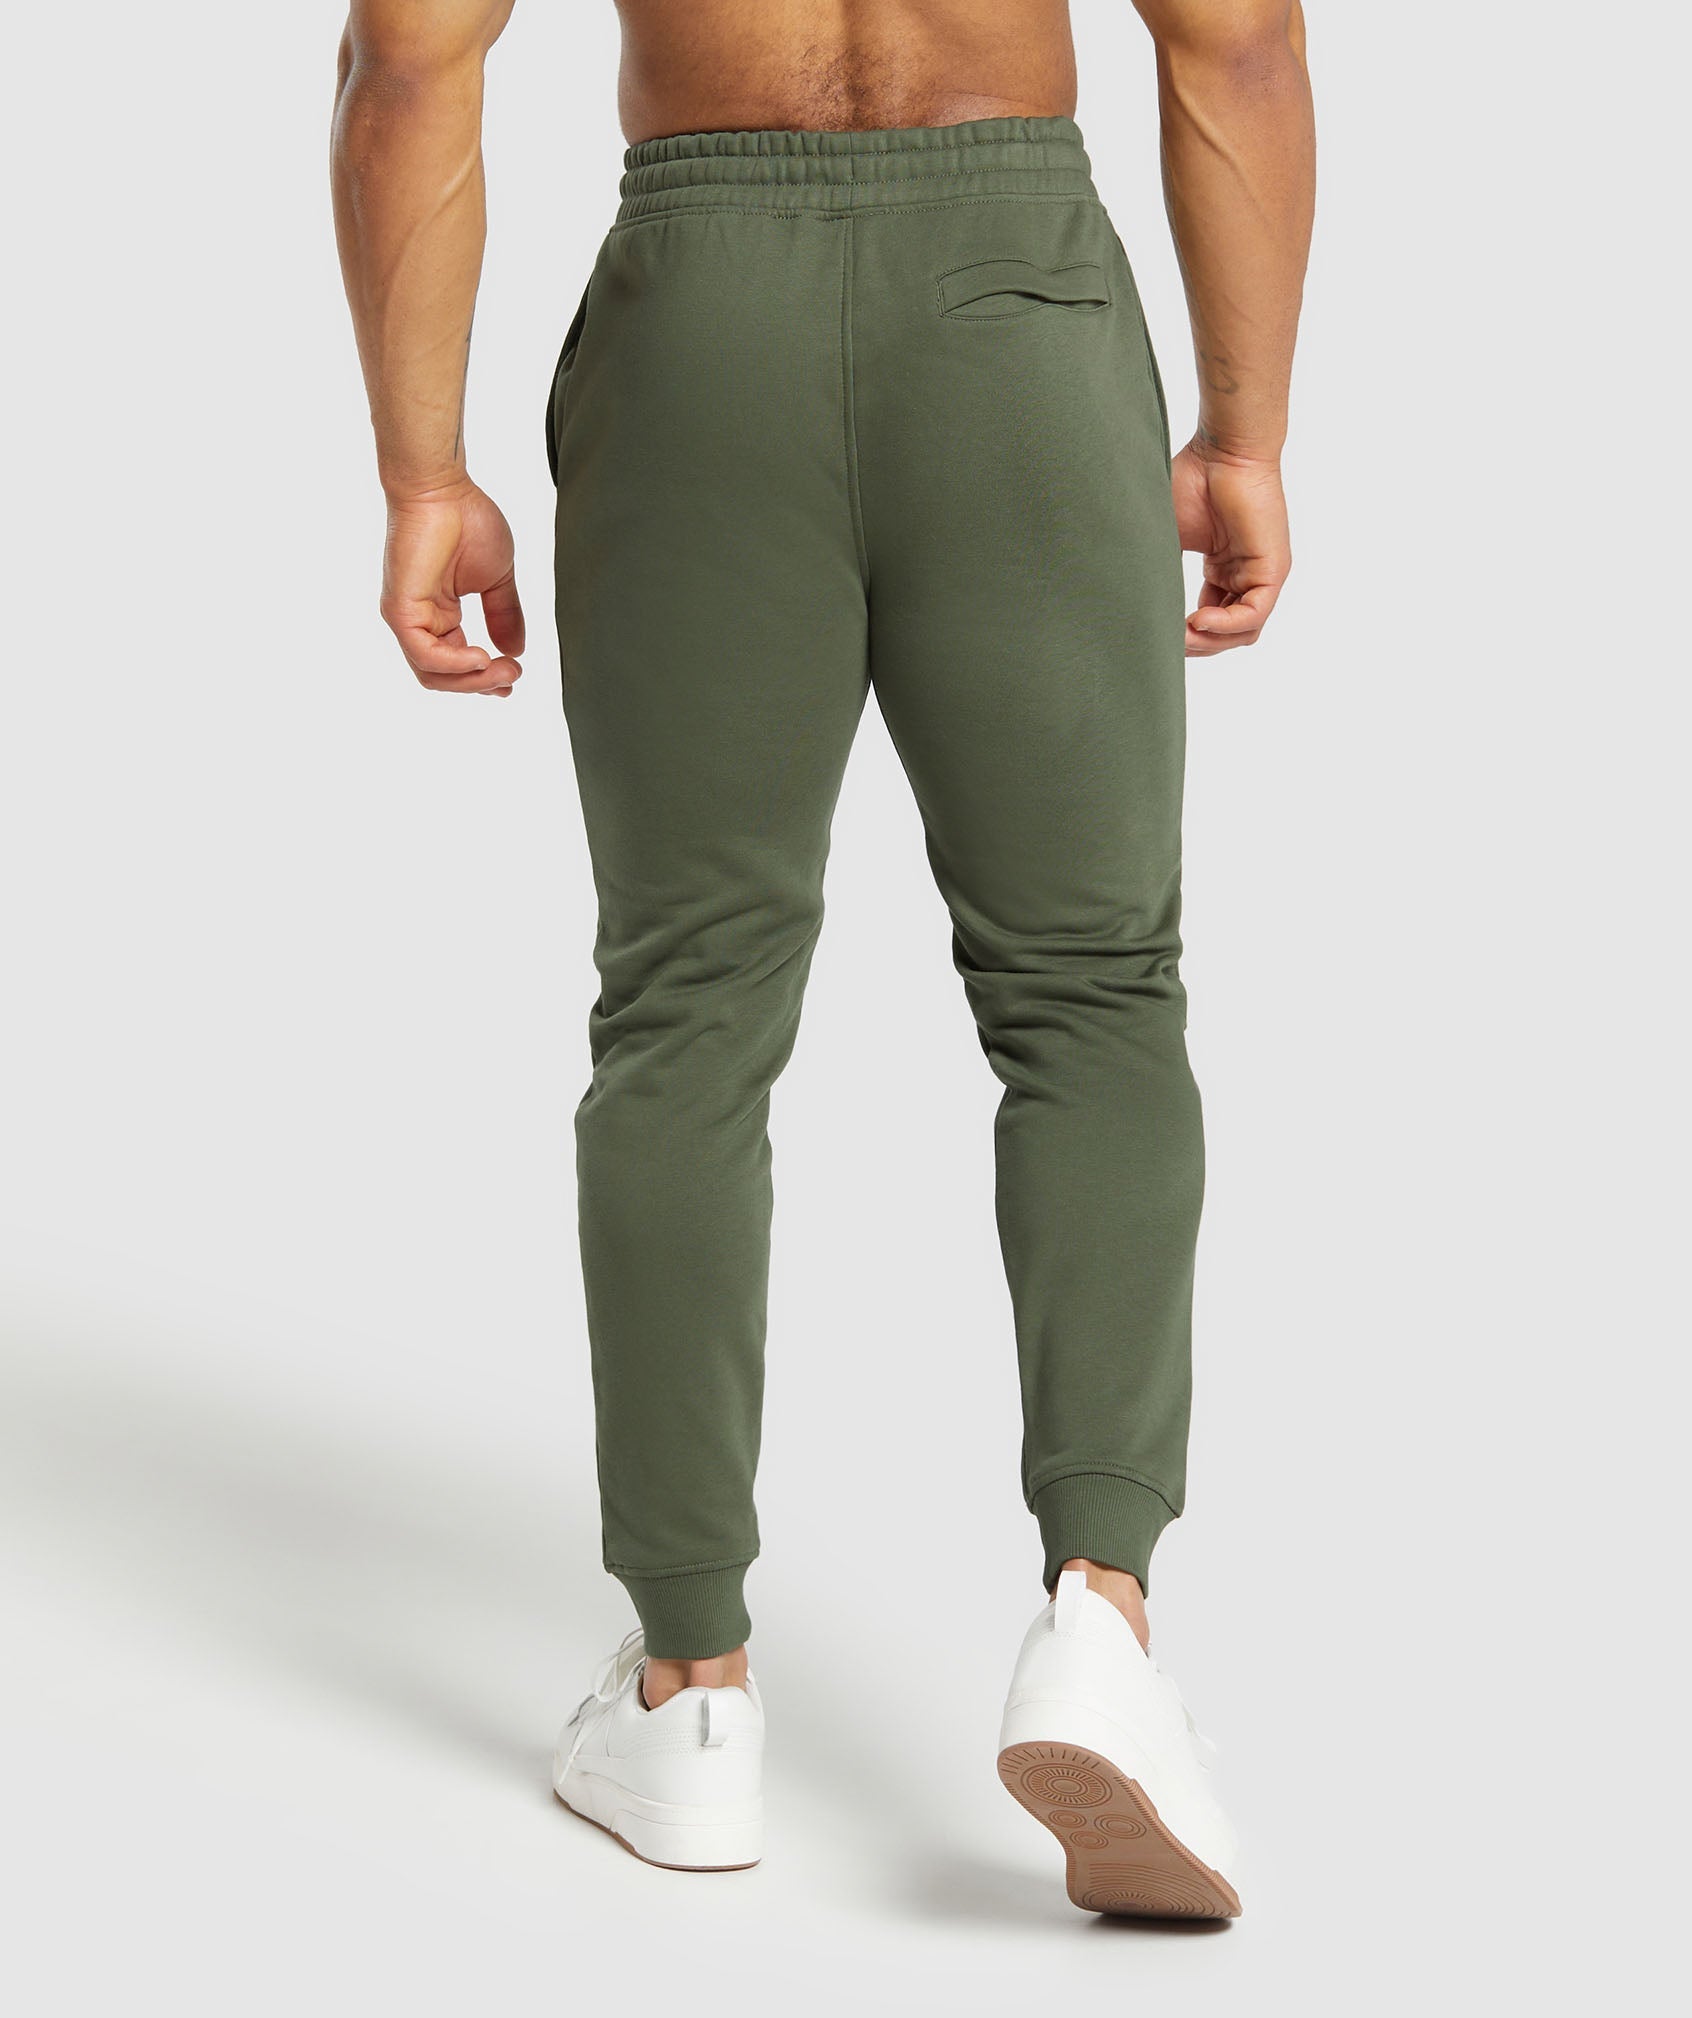 Crest Joggers in Core Olive - view 2